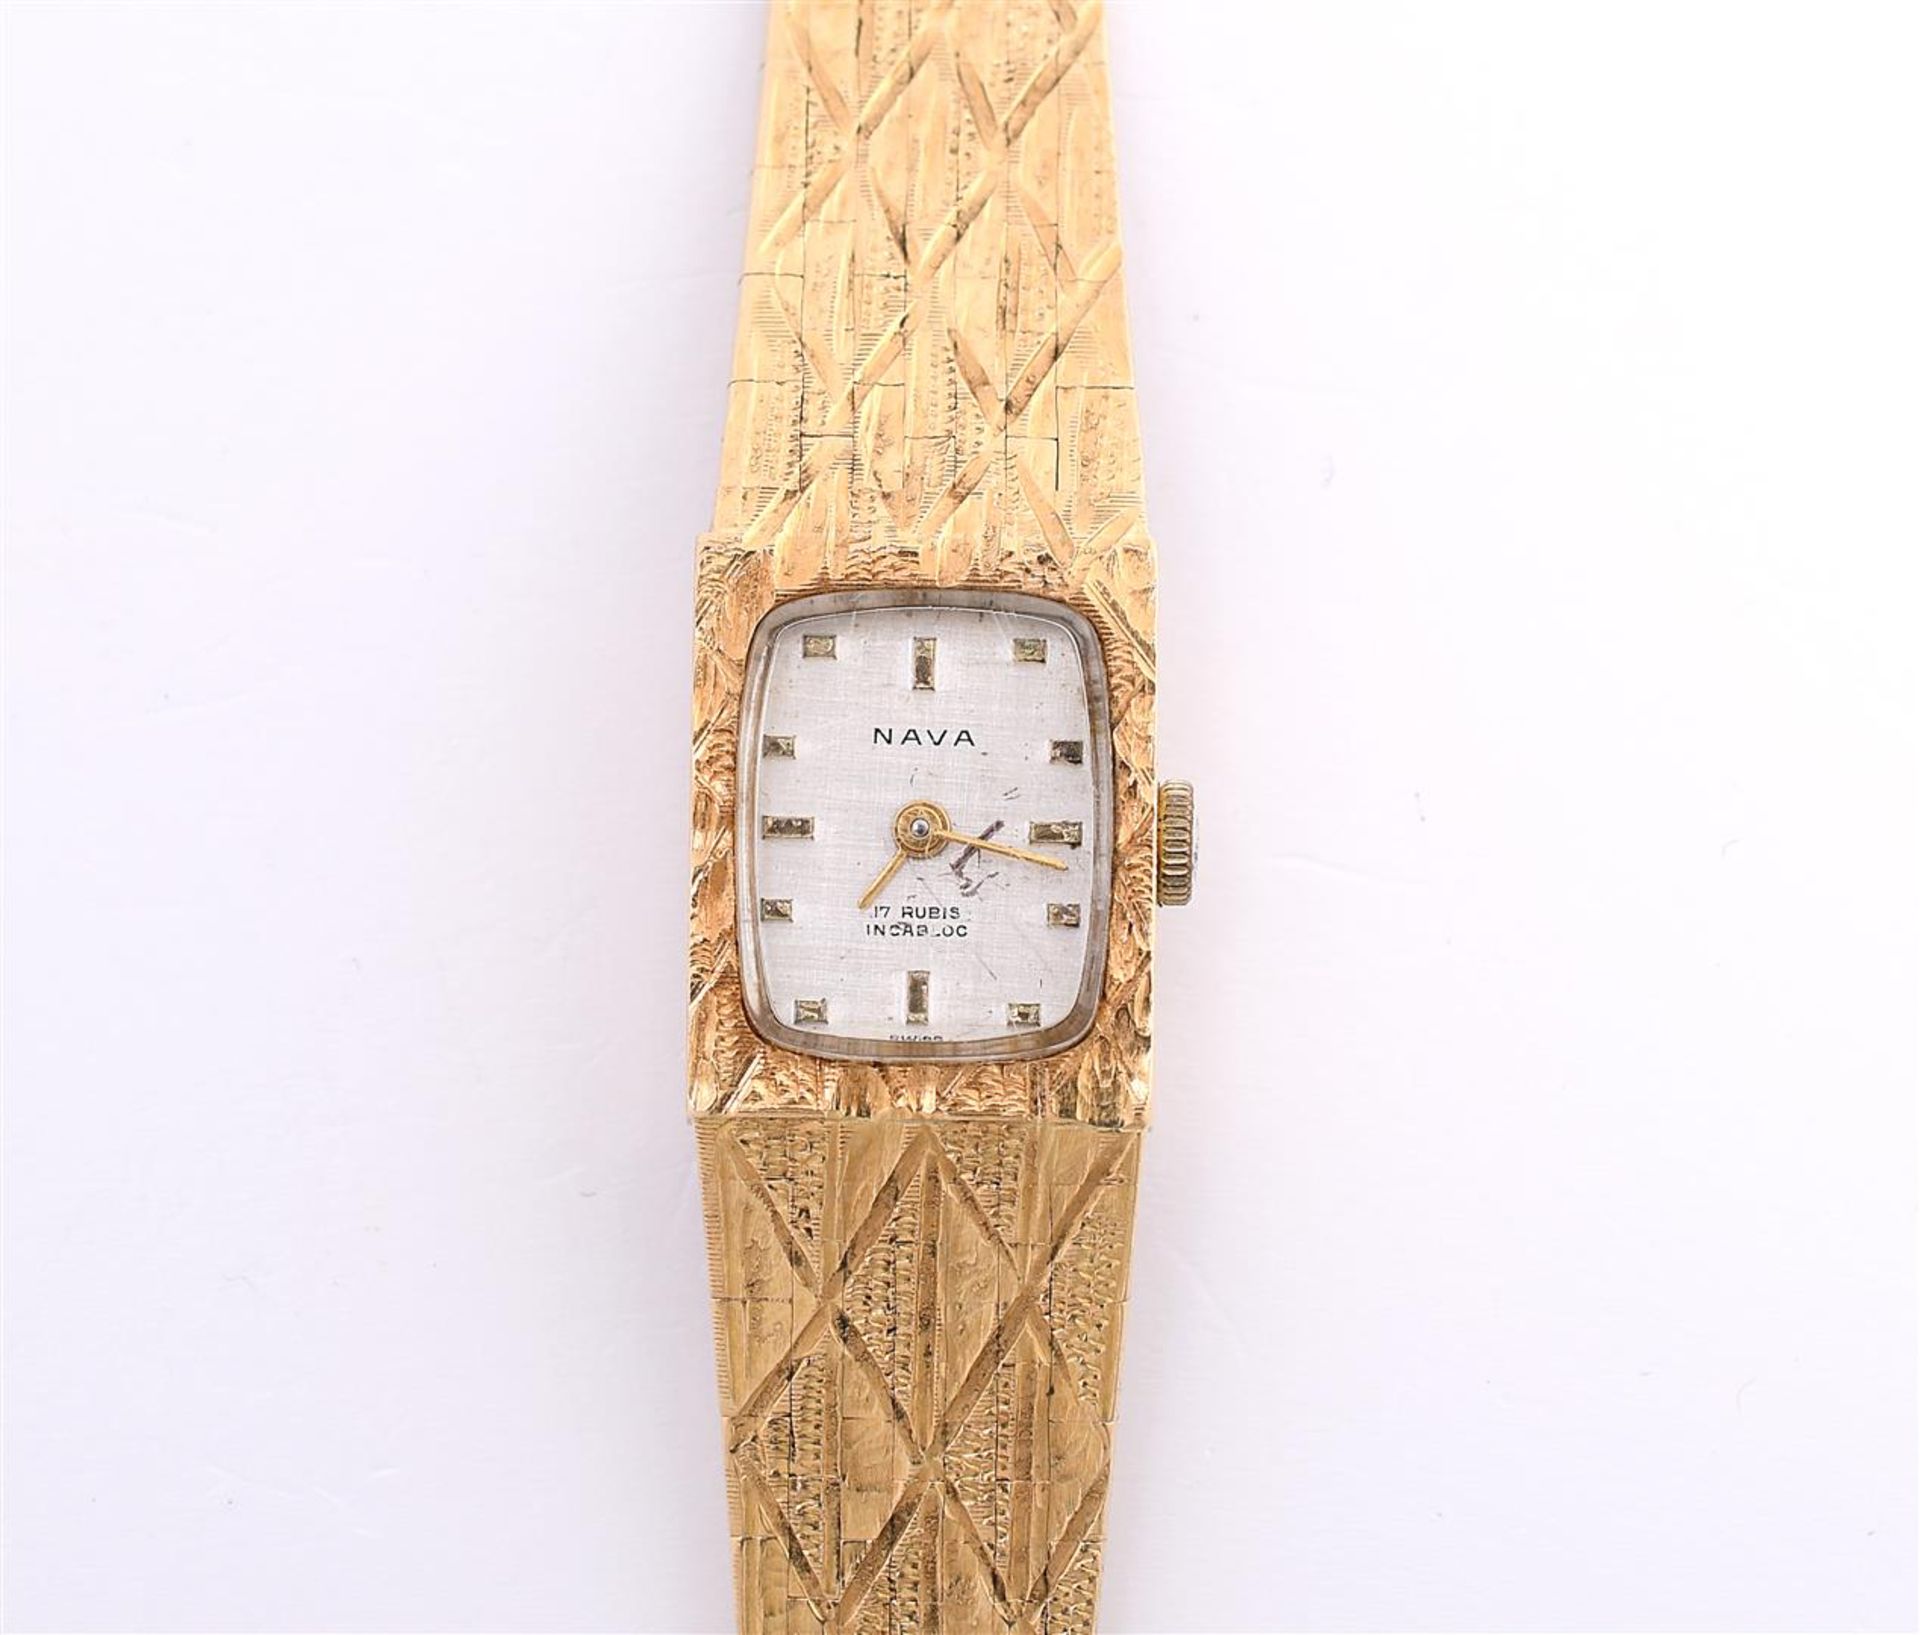 18 kt yellow gold ladies wind-up watch from the Nava brand